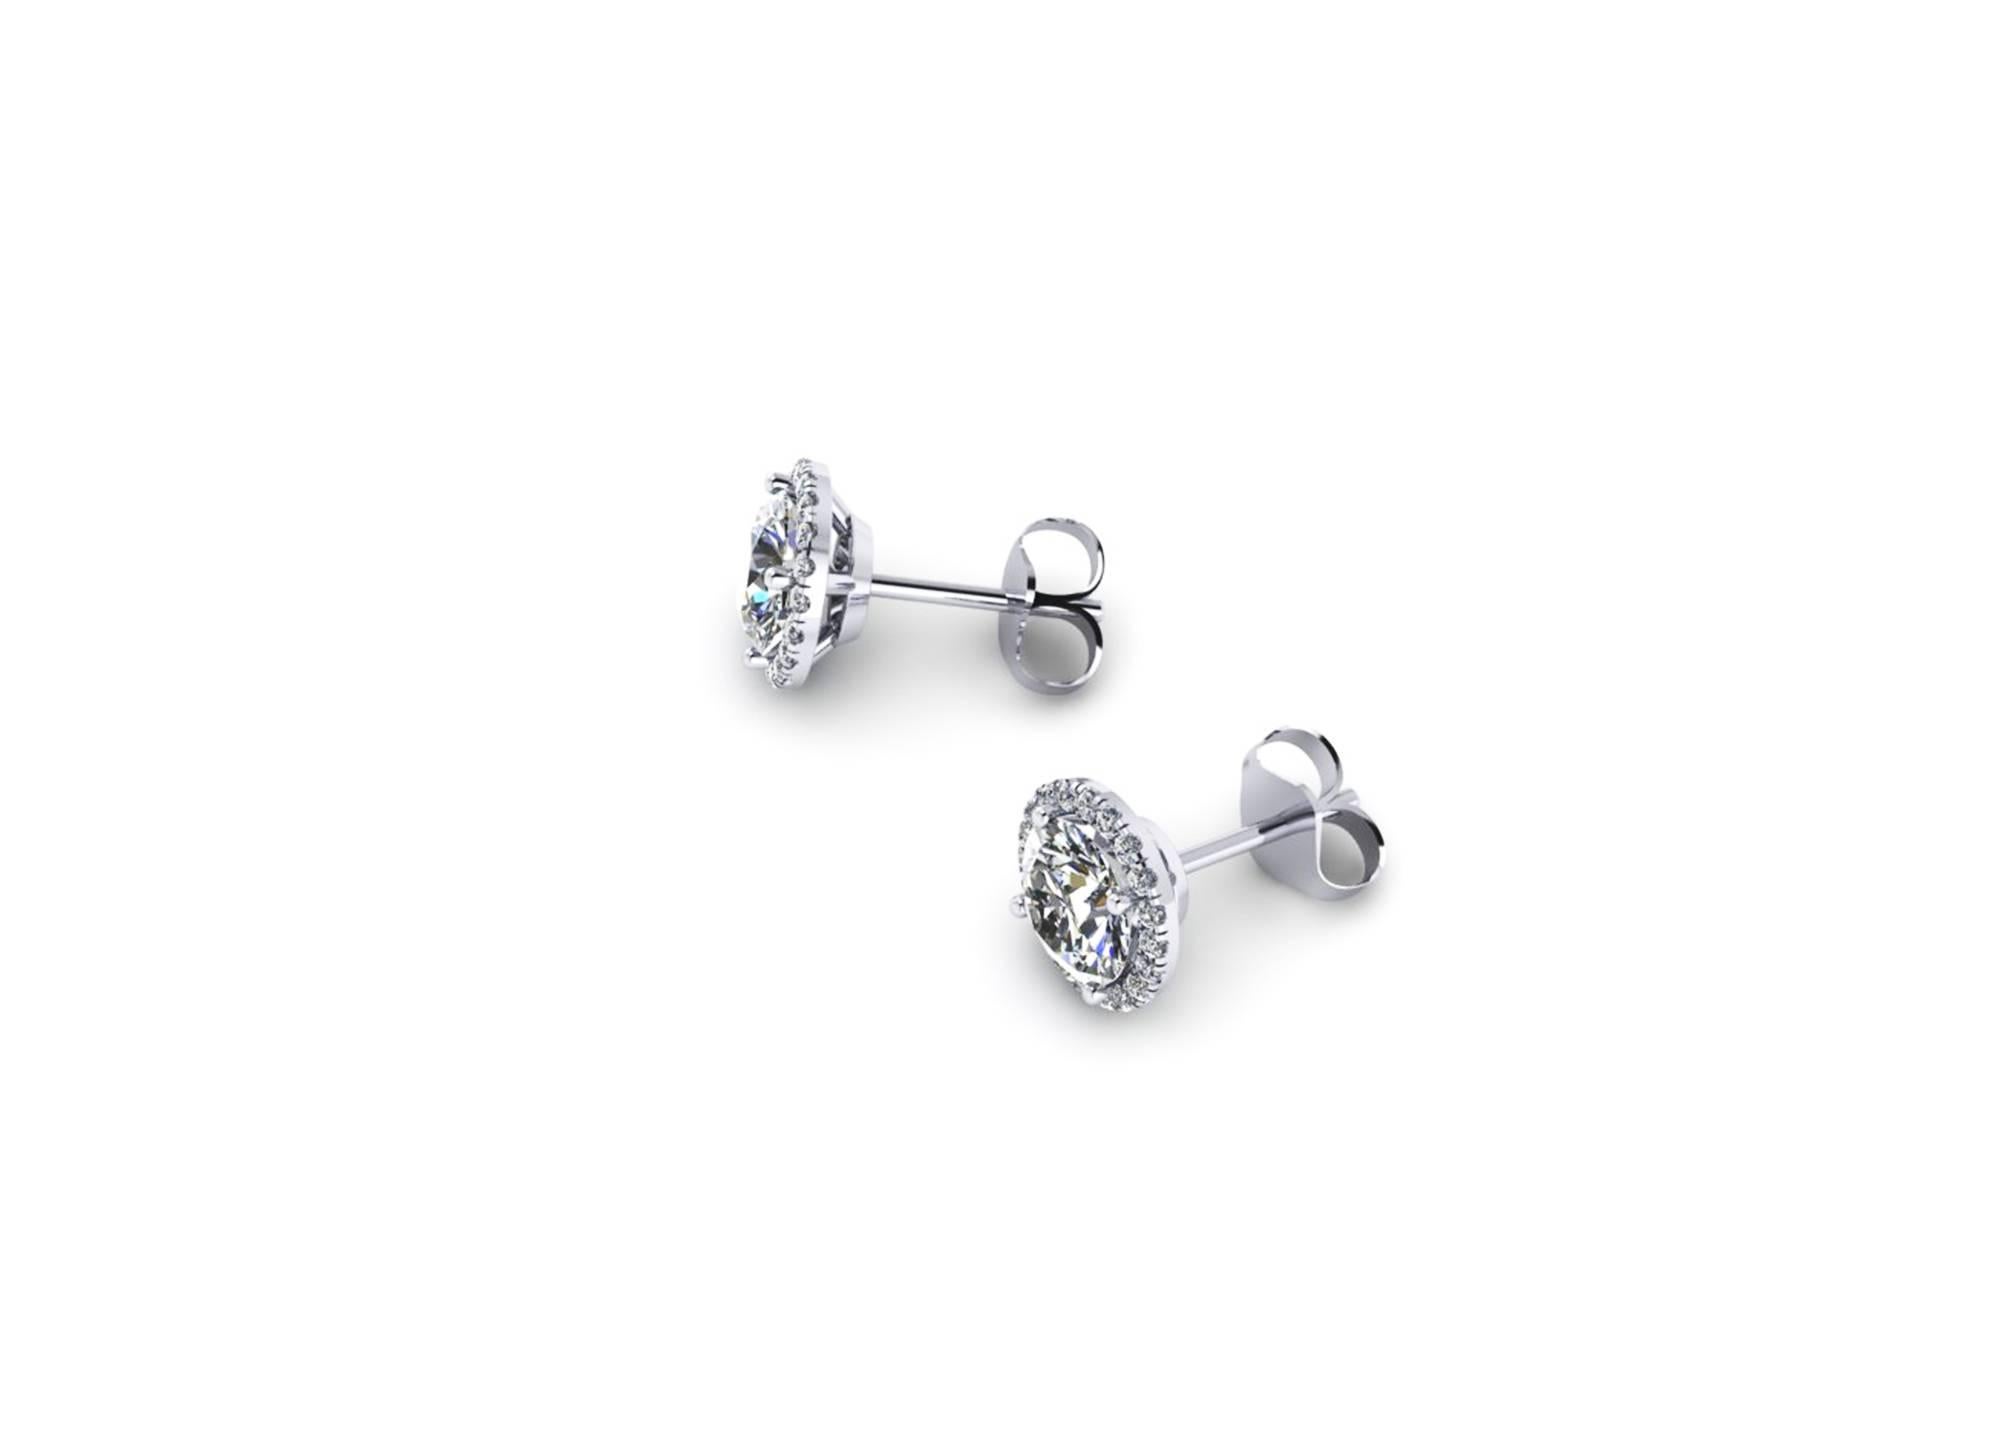 Ferrucci GIA Certified 2.15 Carat Diamond Halo Studs earrings hand made in Platinum in New York City by Italian master jeweler Francesco Ferrucci,
two gorgeous diamonds, G color, IF internally flawless of 1.06 carat and 1.05 carat, GIA Certificate